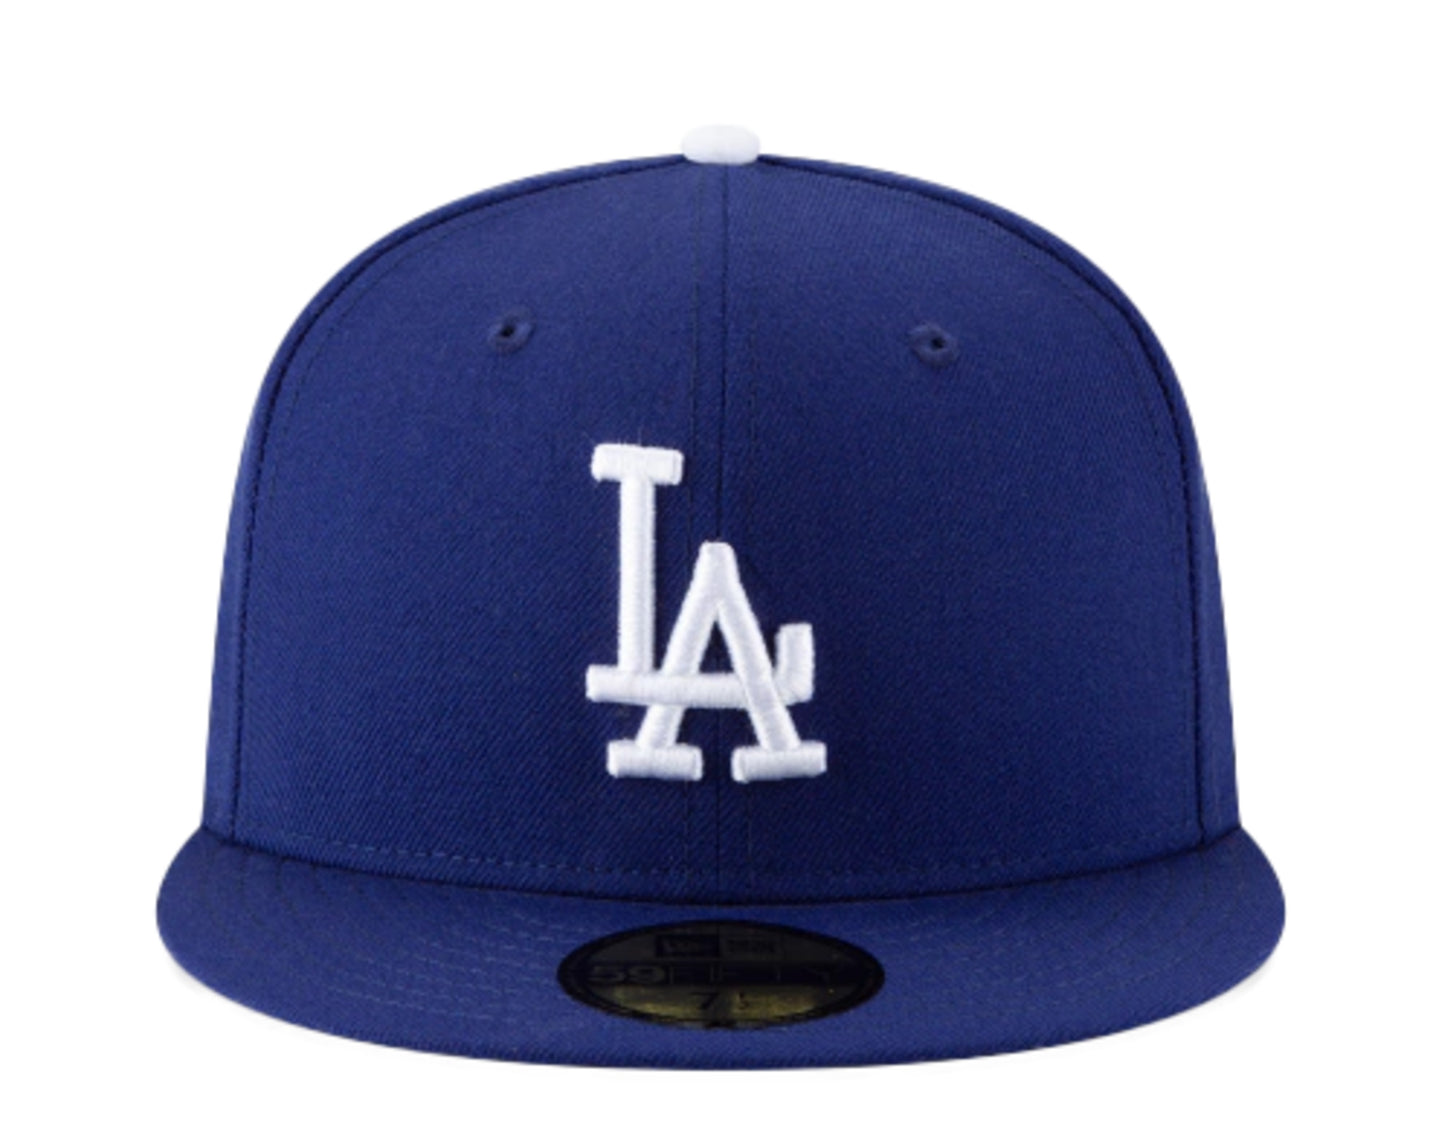 New Era 59Fifty MLB Los Angeles Dodgers Wool Royal Blue Fitted Hat 11941907